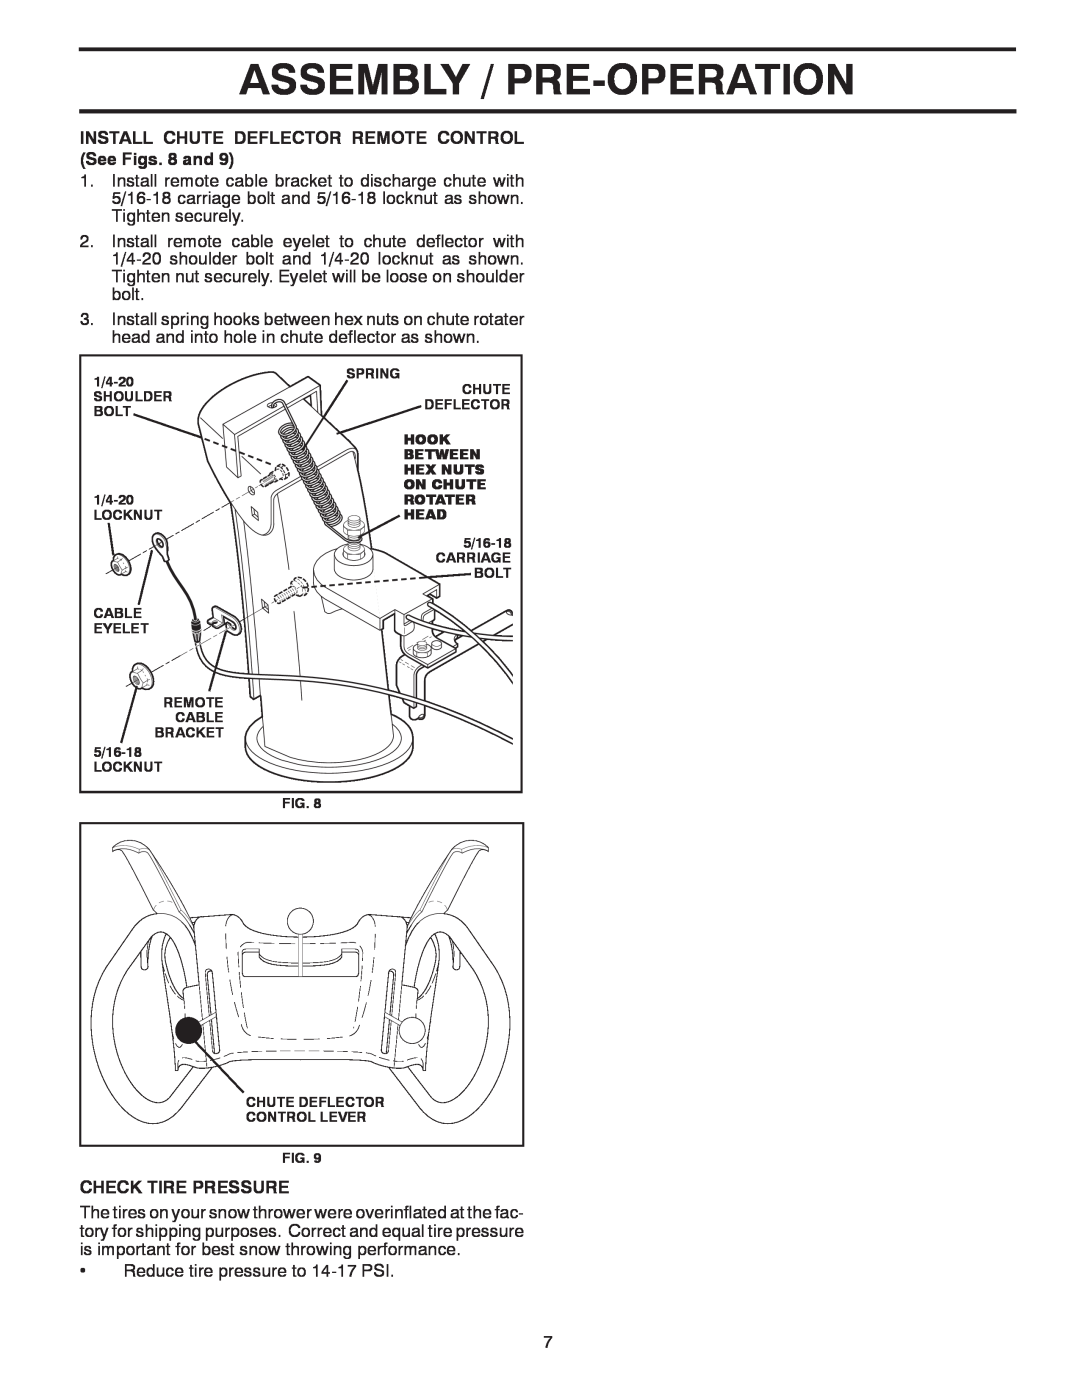 Poulan 96192004300 Assembly / Pre-Operation, INSTALL CHUTE DEFLECTOR REMOTE CONTROL See Figs. 8 and, Check Tire Pressure 